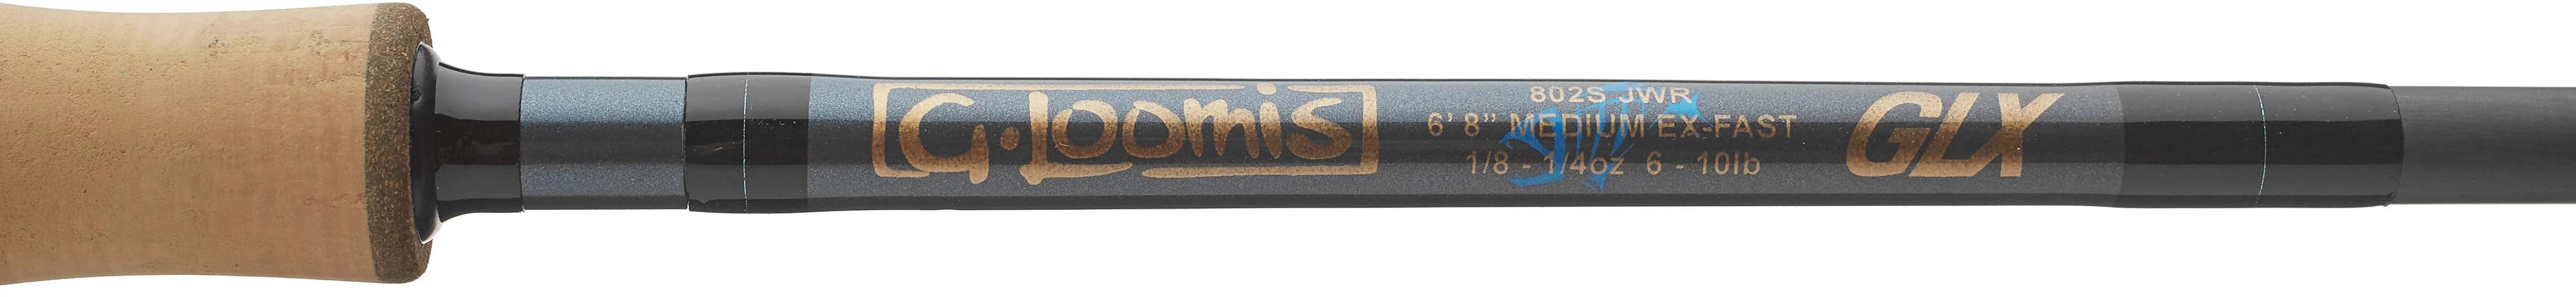 G-Loomis GLX Spinning Rods — Discount Tackle